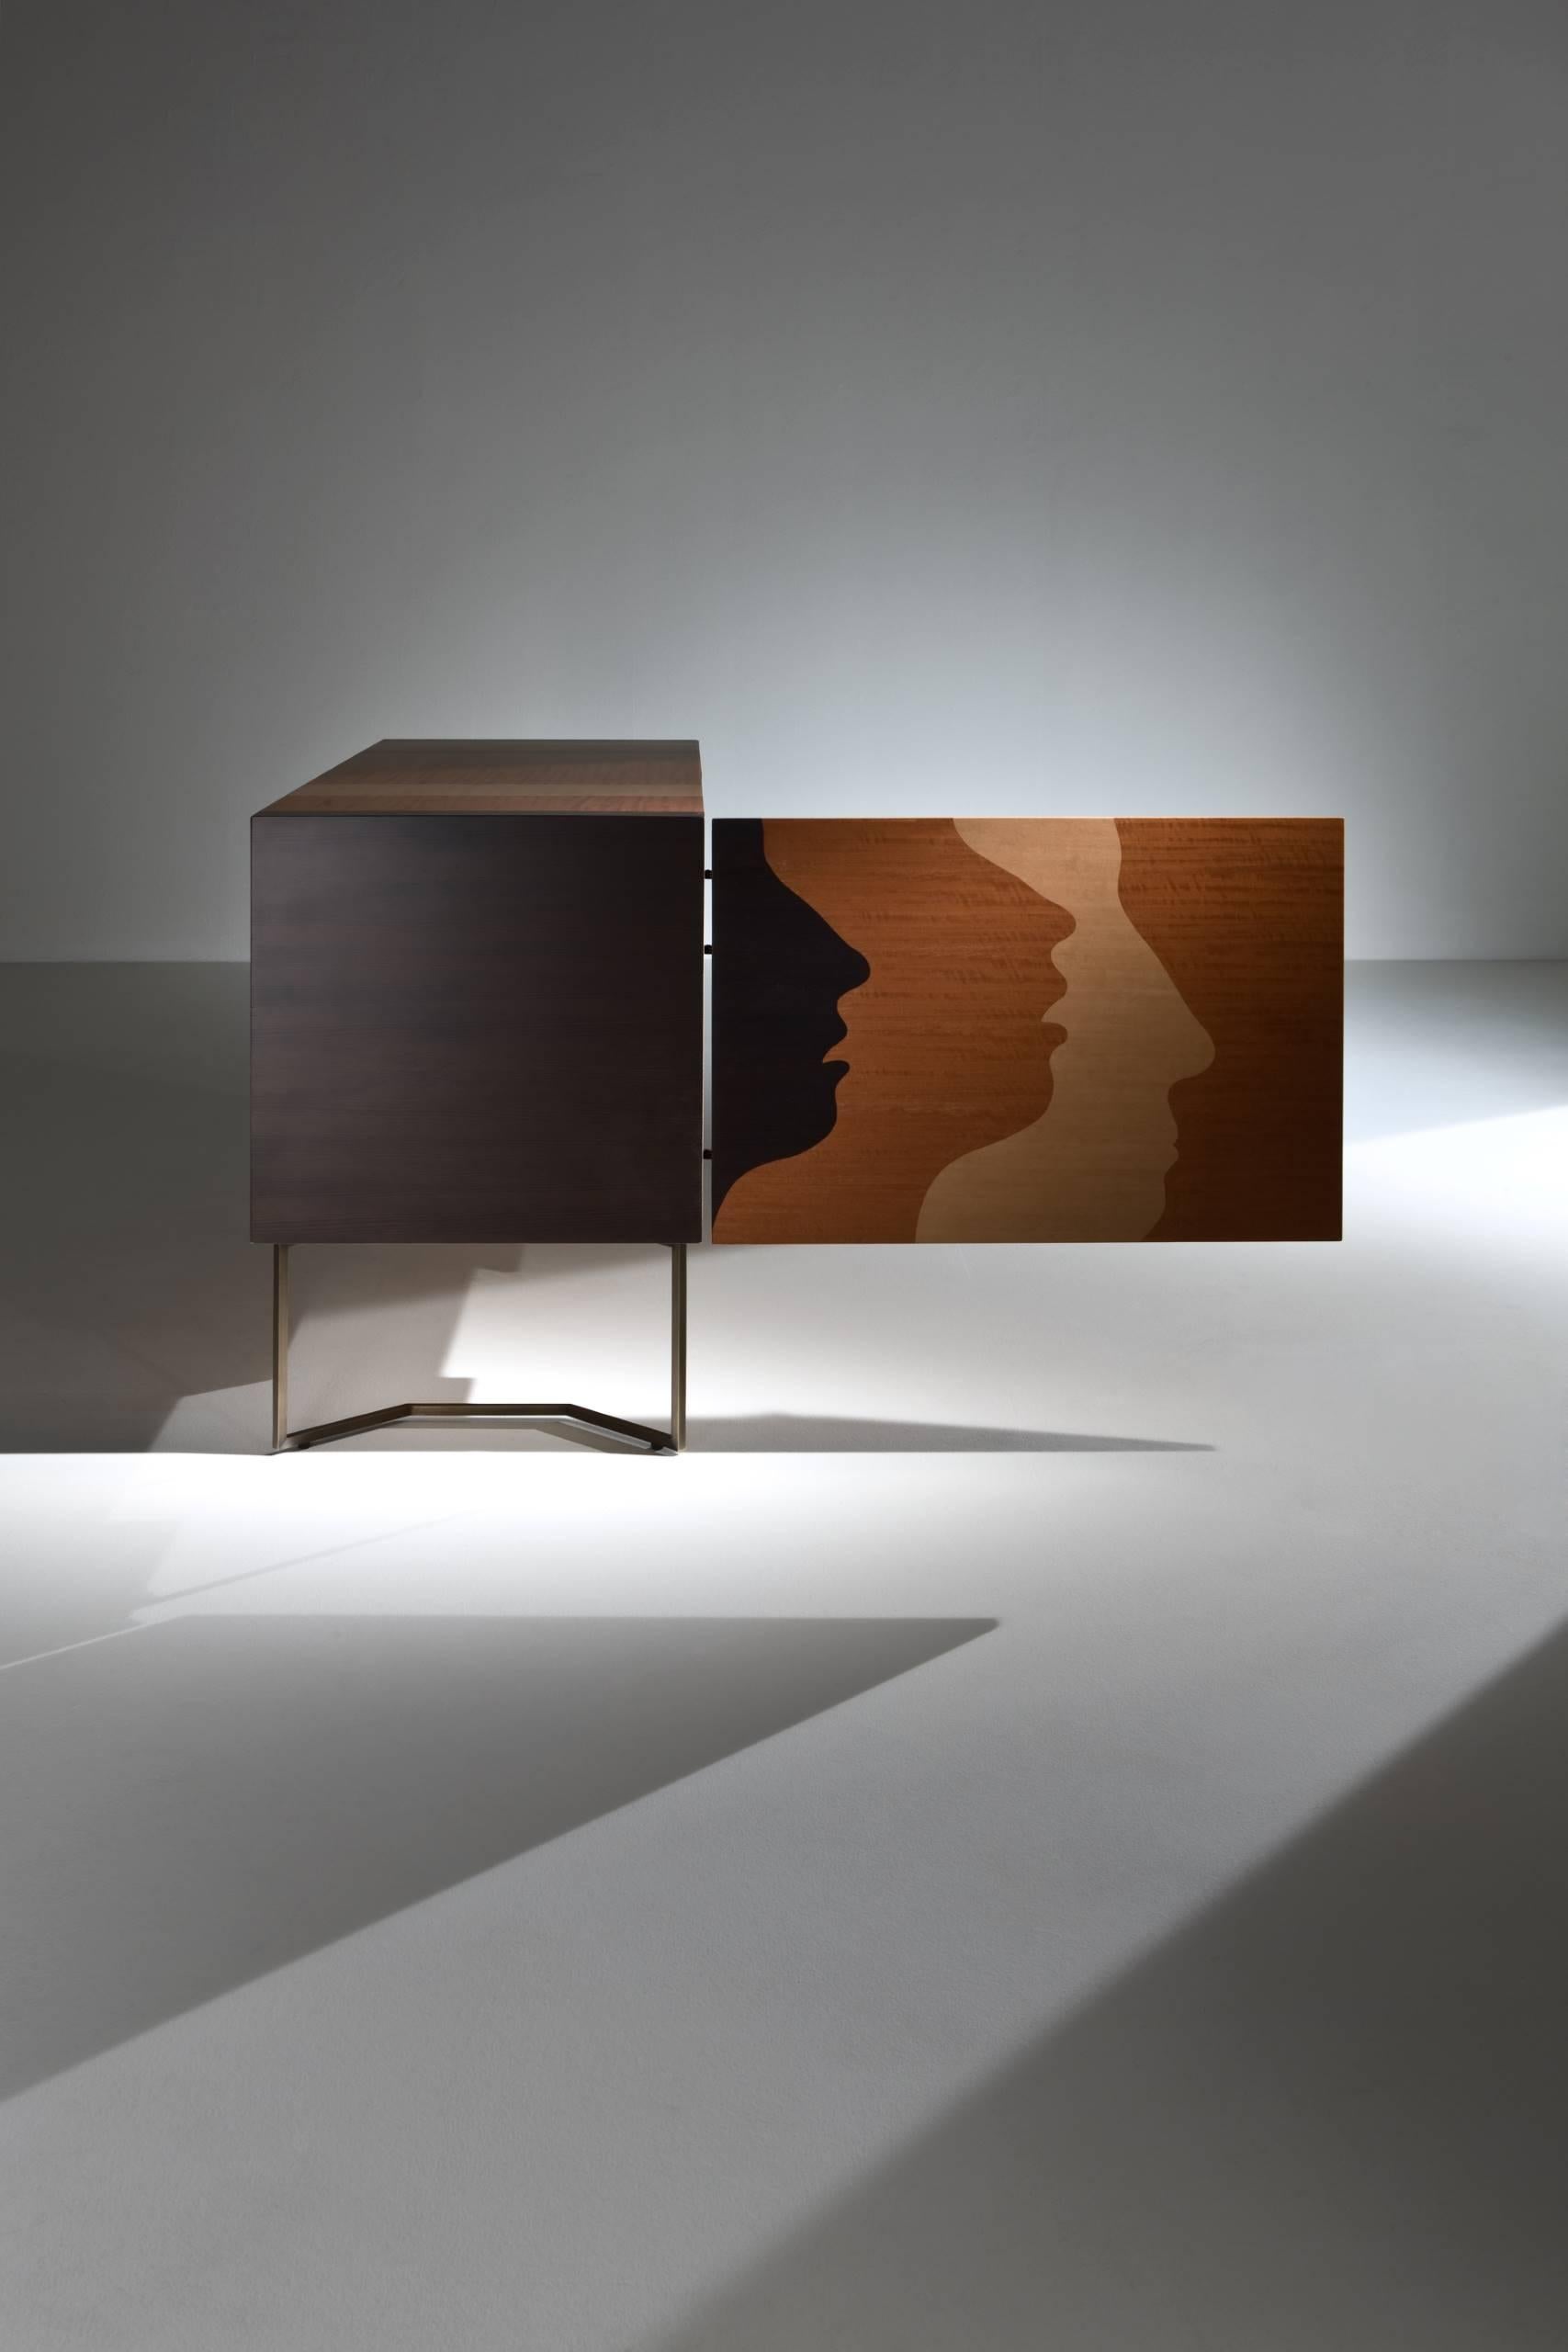 Sideboard with burnished brass legs, inlaid doors and structure. Fitted with push-pull doors, one internal shelf and two drawers.

FINISH:
Limited Edition Art Inlay

Thanks to the ancient art of wood inlays the outlines of the faces create a 3D